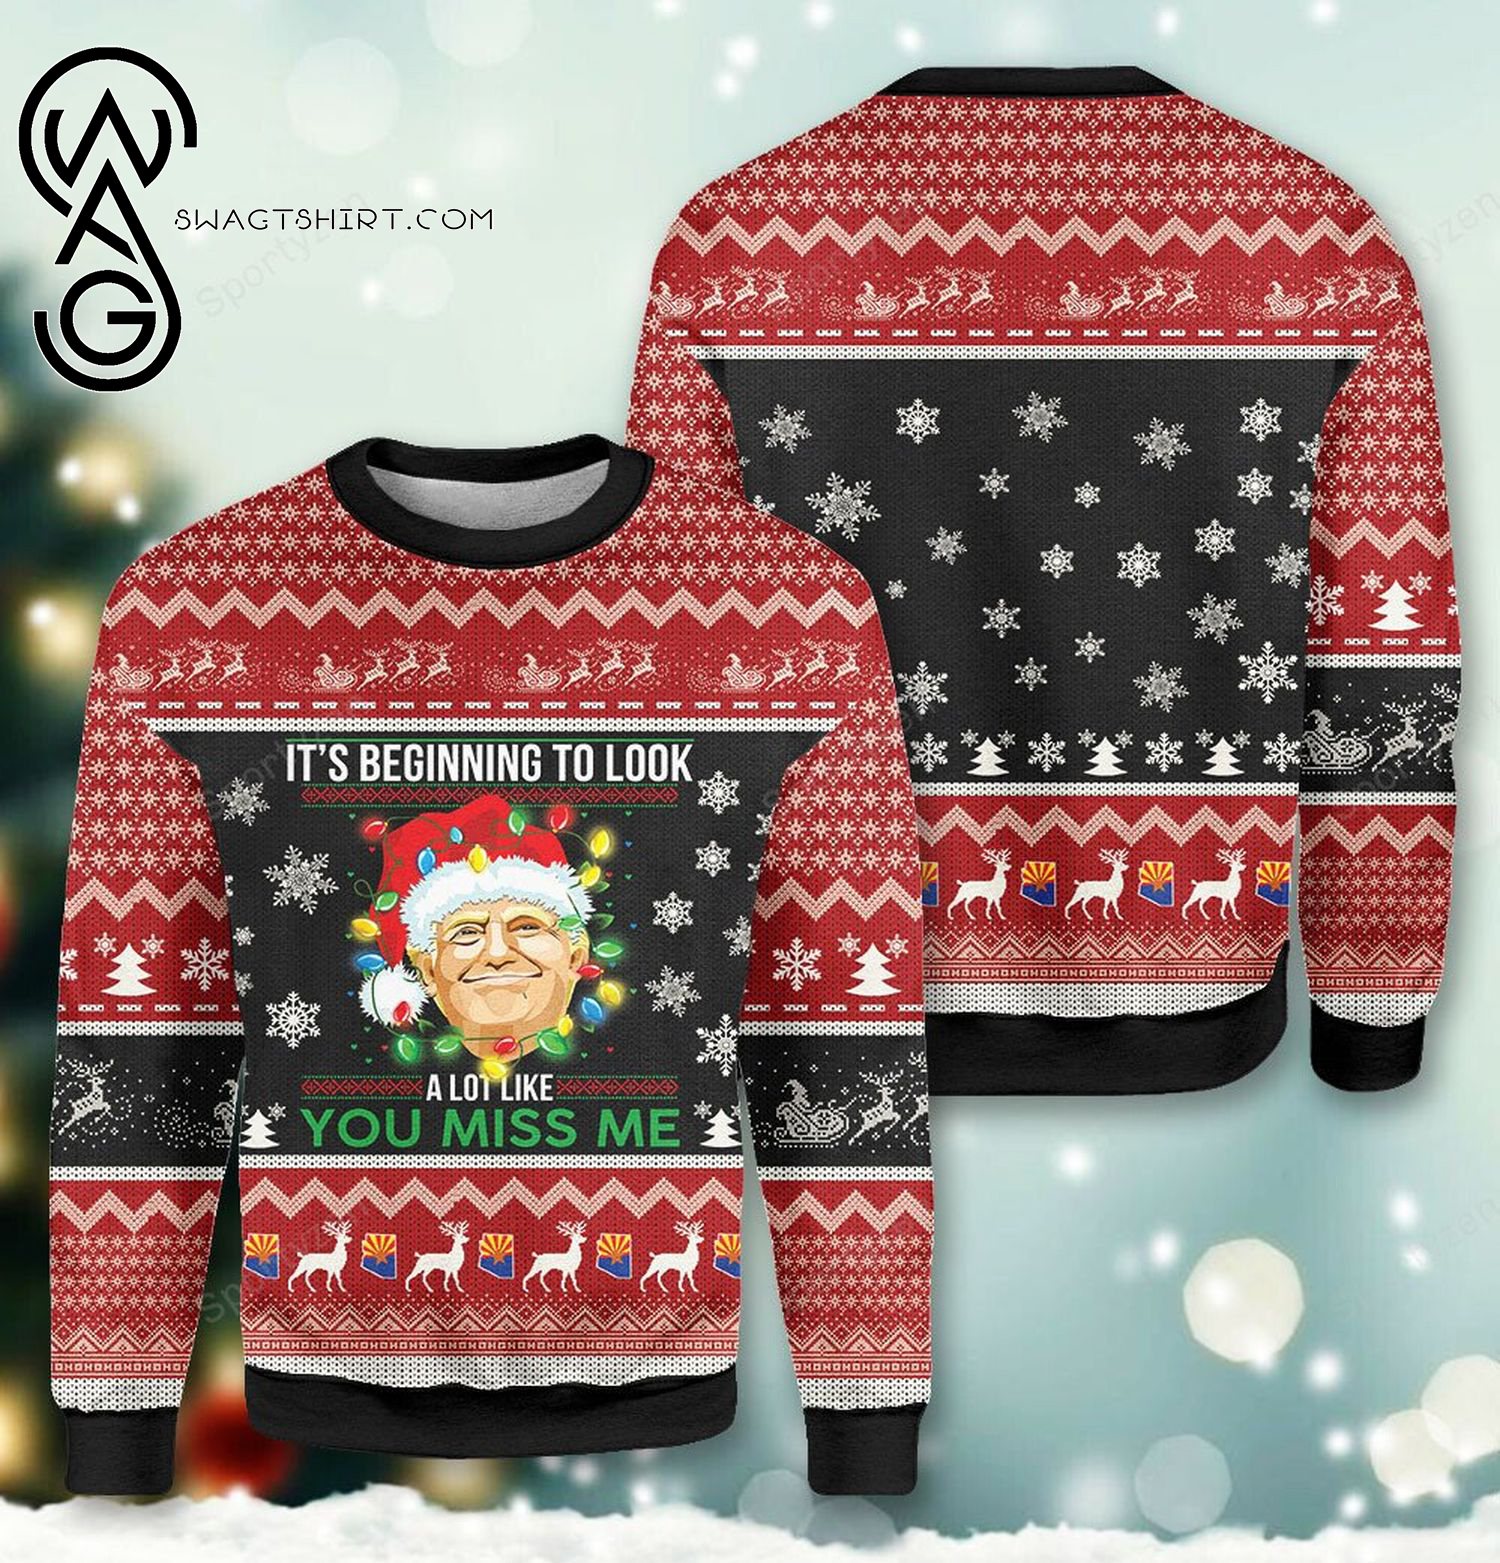 Trump It's Beginning to Look A Lot Like you Miss Me Ugly Christmas Sweater